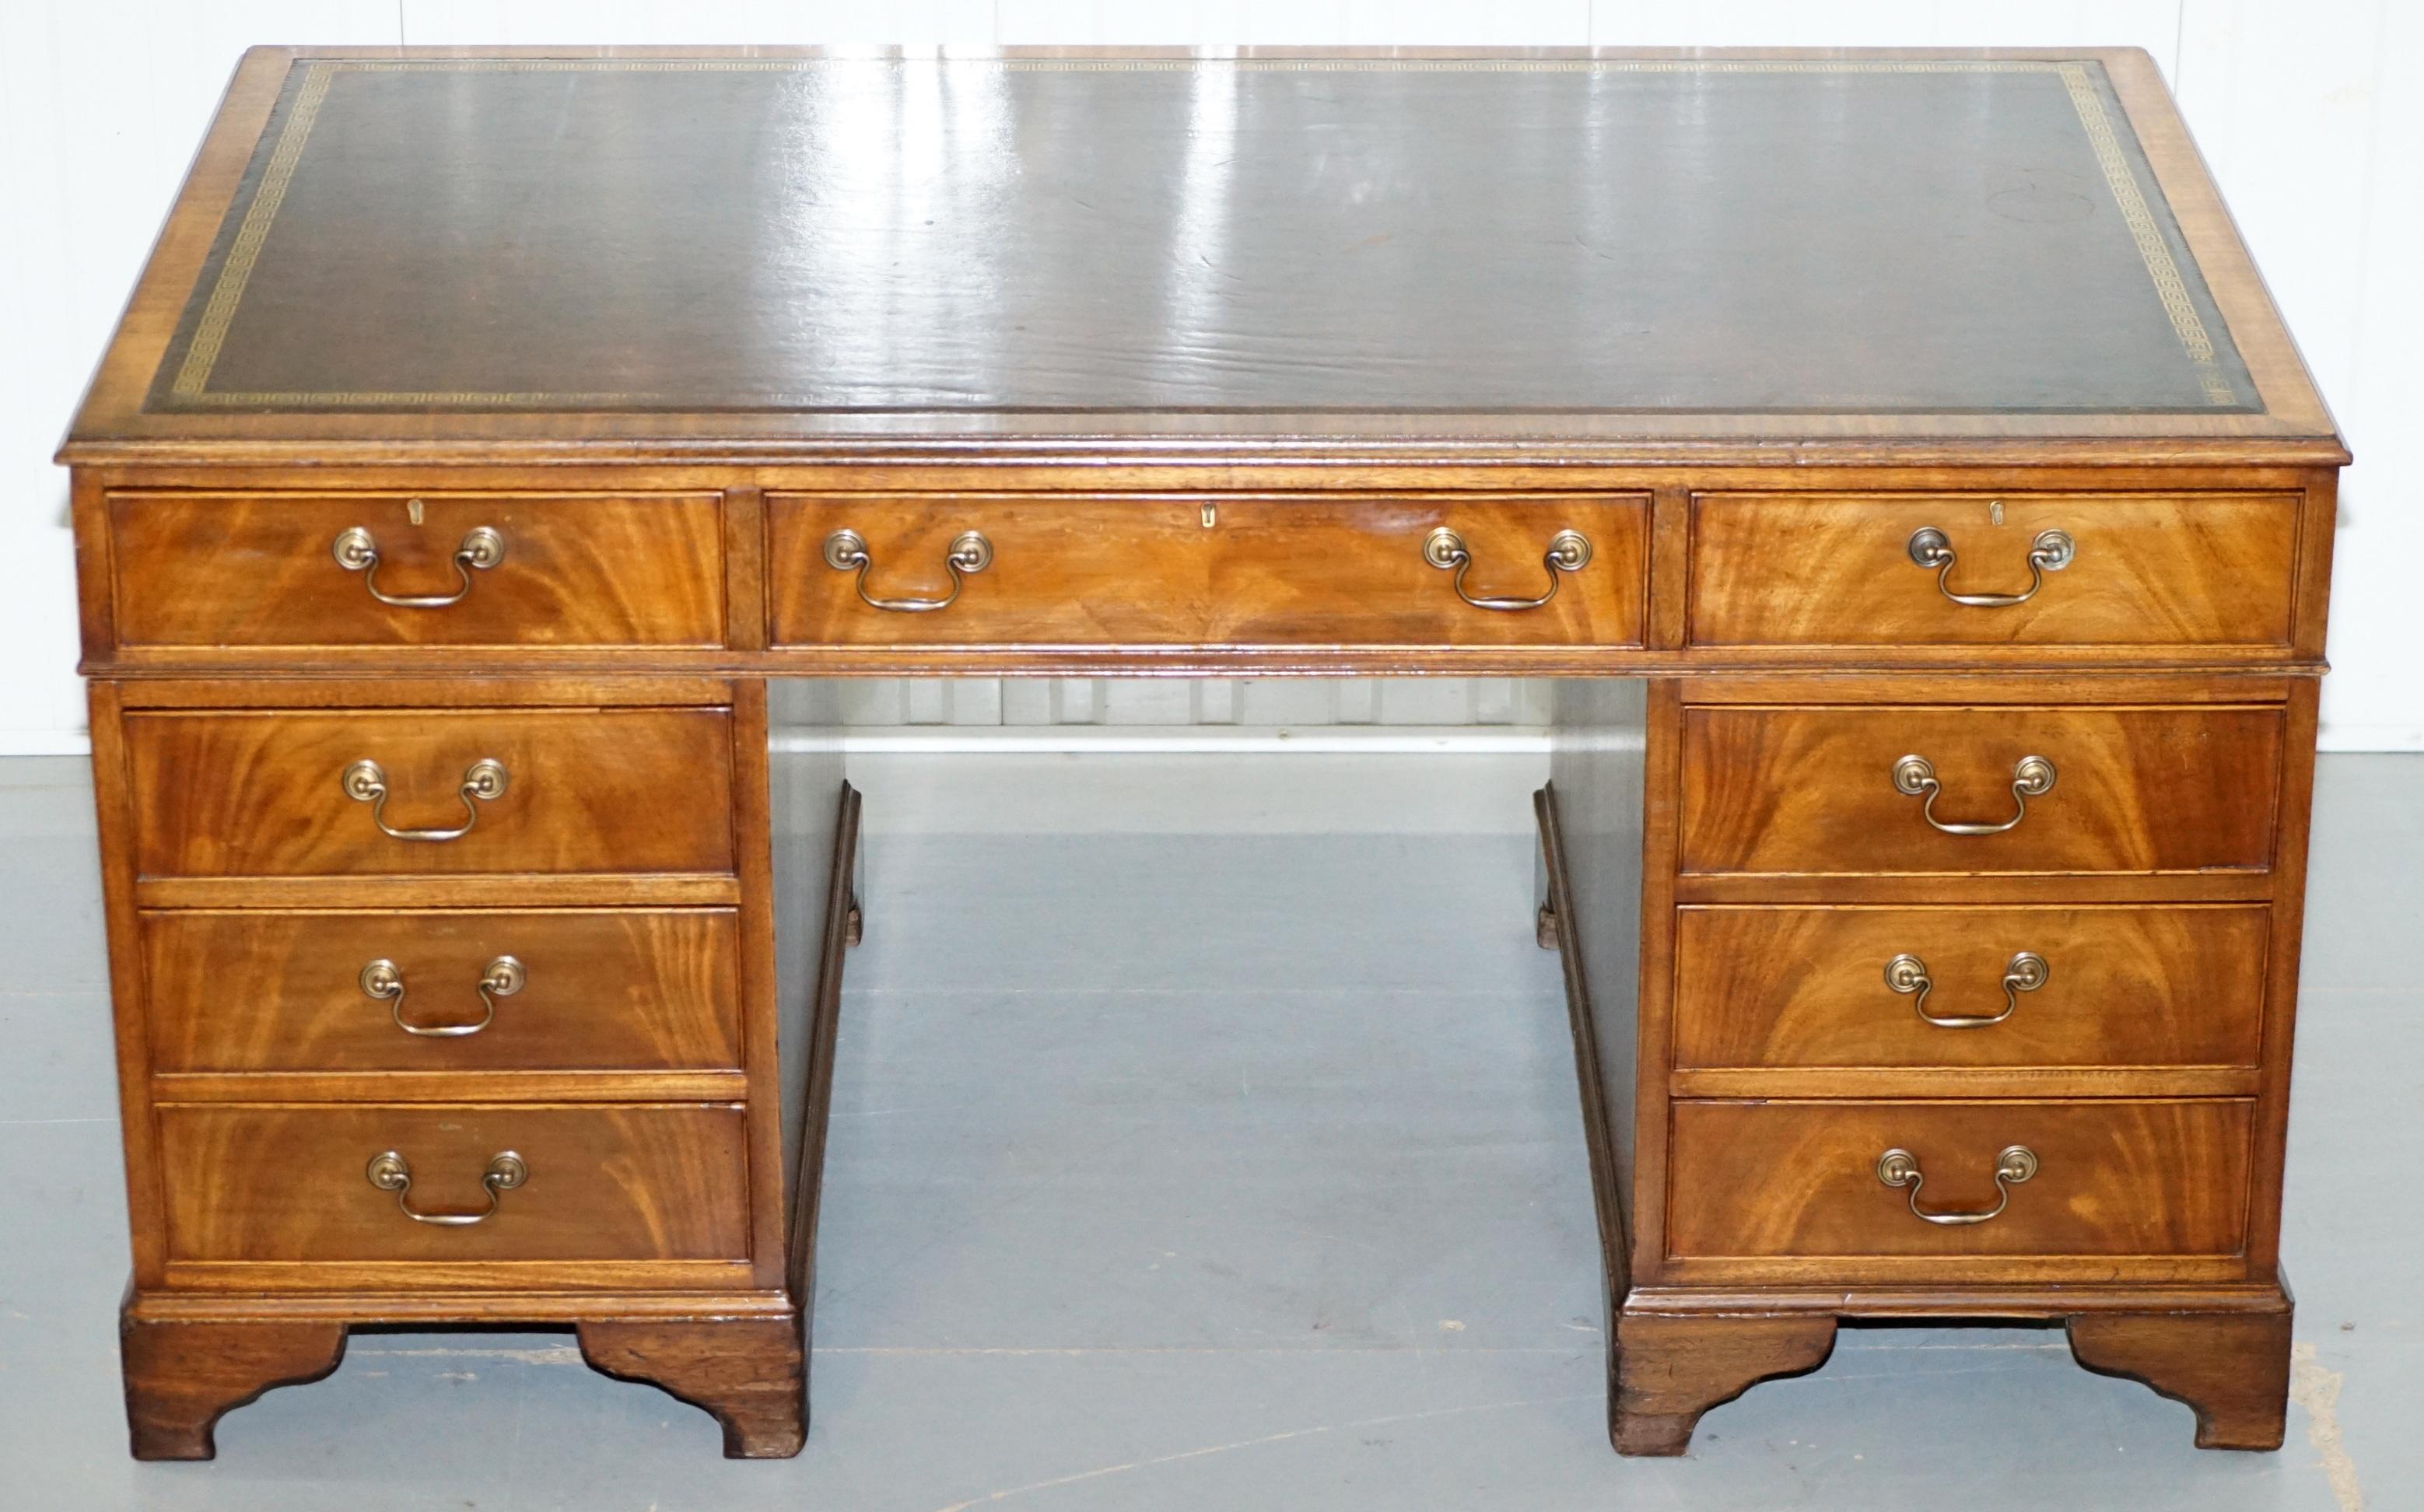 We are delighted to offer for sale this large Premium luxury Mahogany twin pedestal partner desk with brown leather surface that has gold leaf embossing 

This is a well made solid vintage desk, classed as a large, it is 30cm wider than normal and